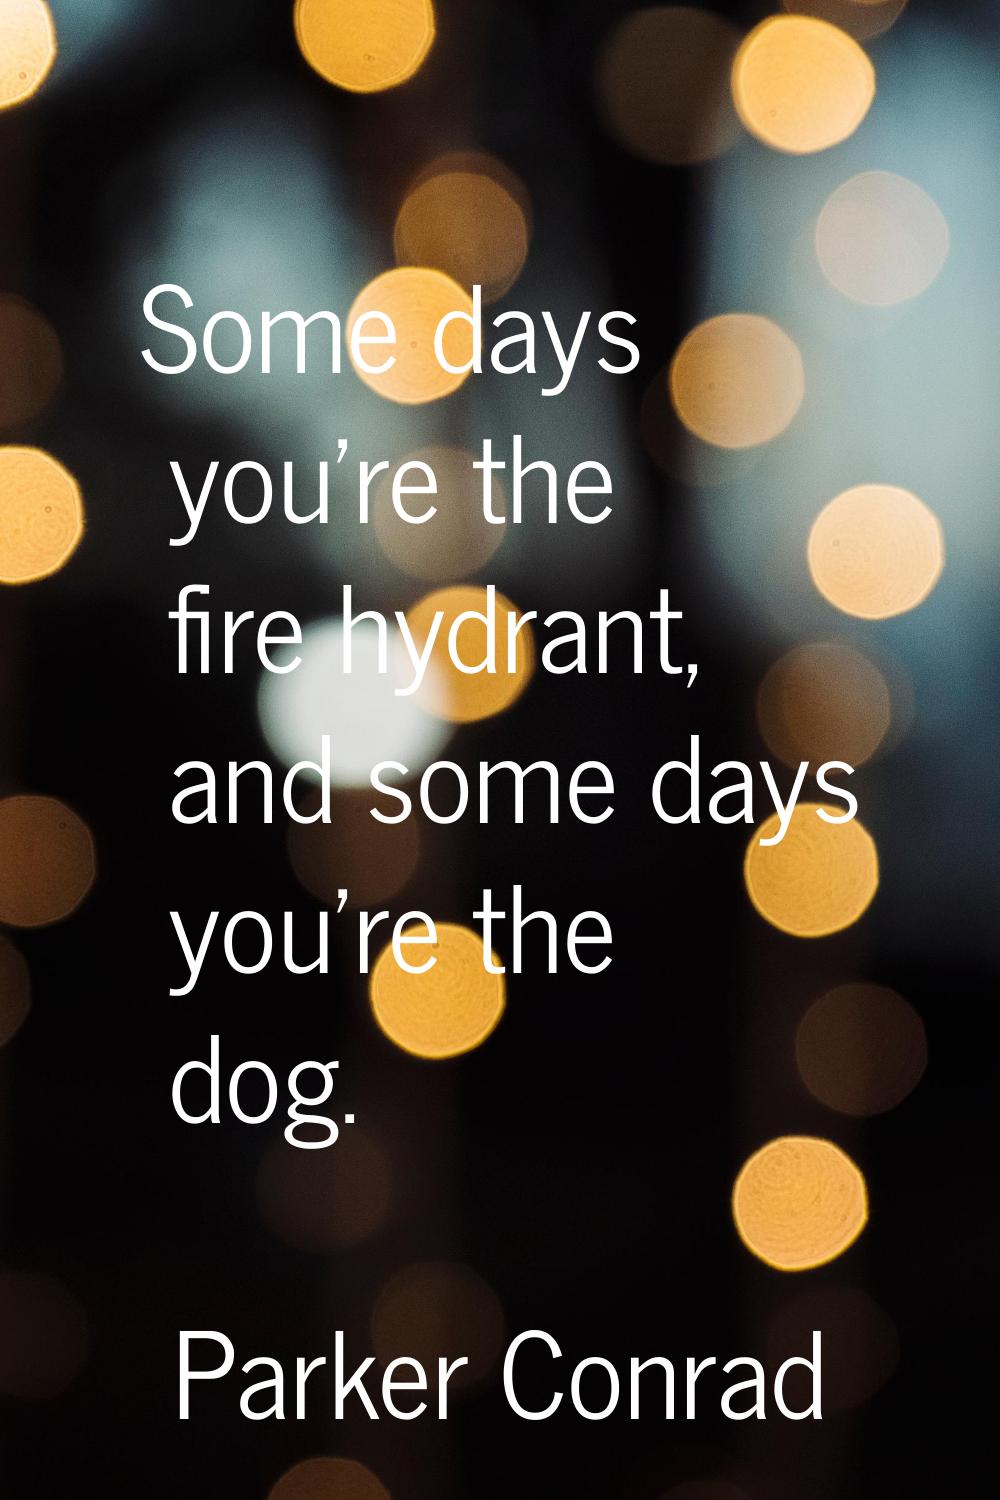 Some days you're the fire hydrant, and some days you're the dog.